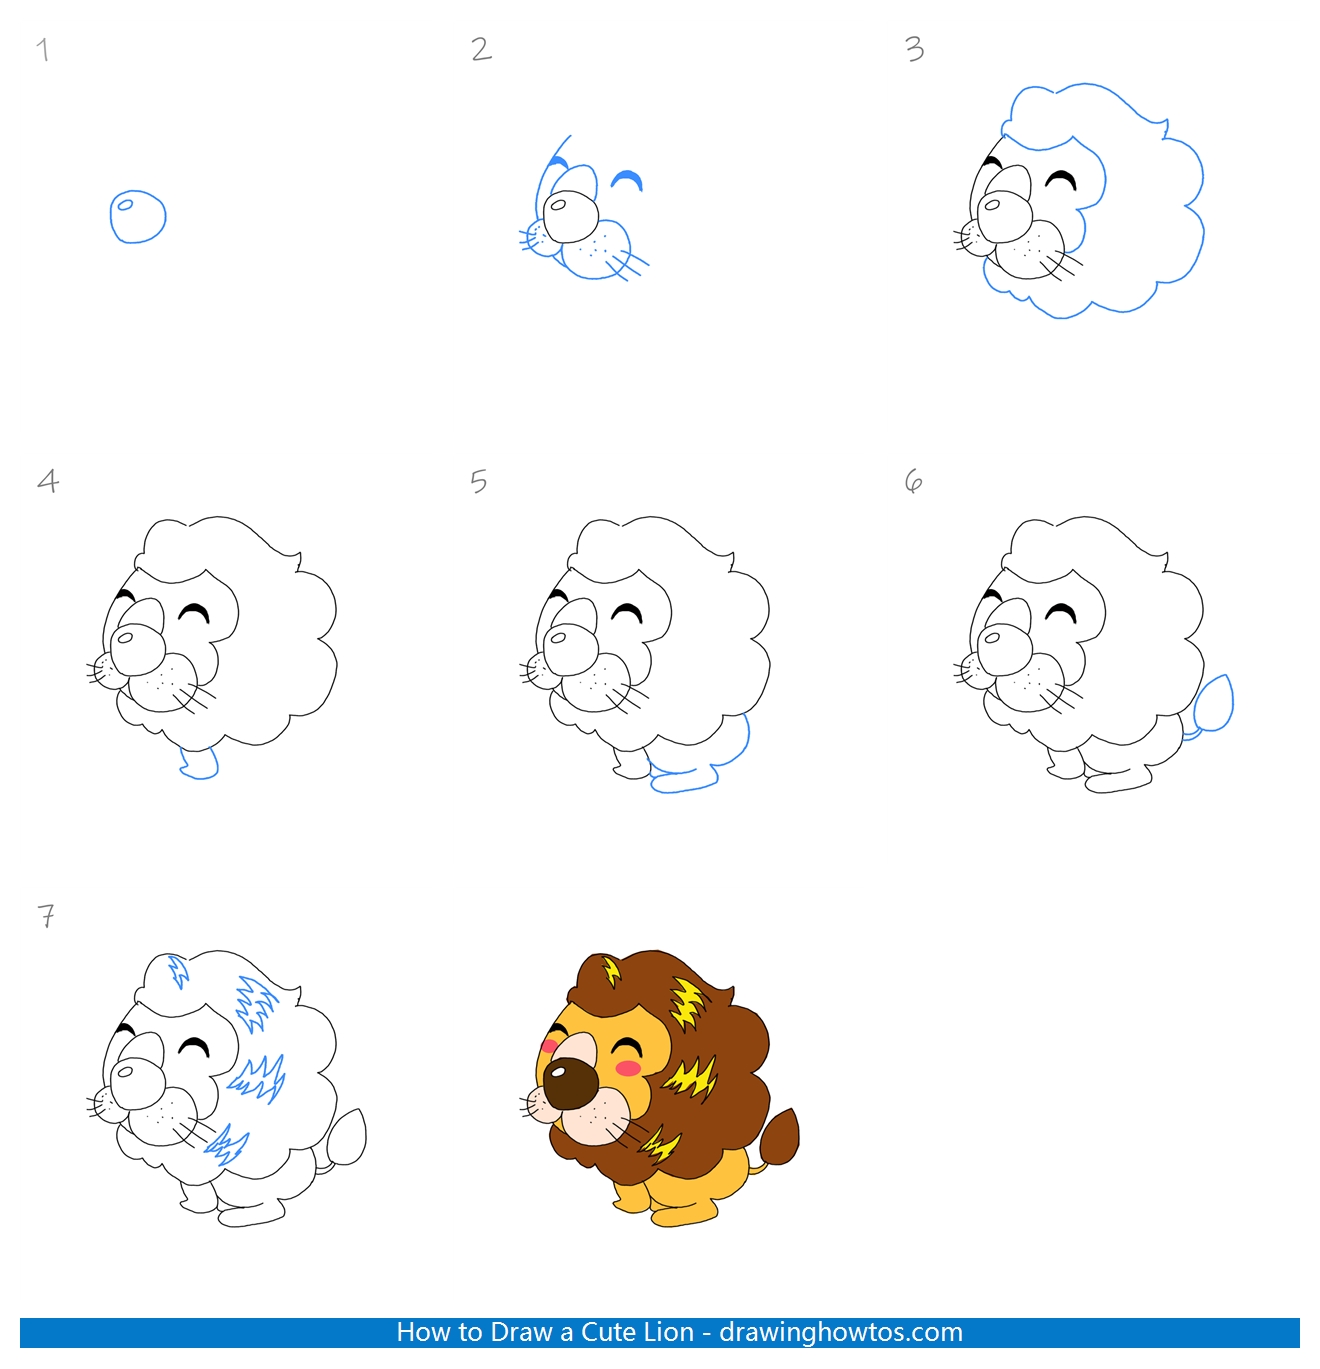 How to draw a cute lion step by step